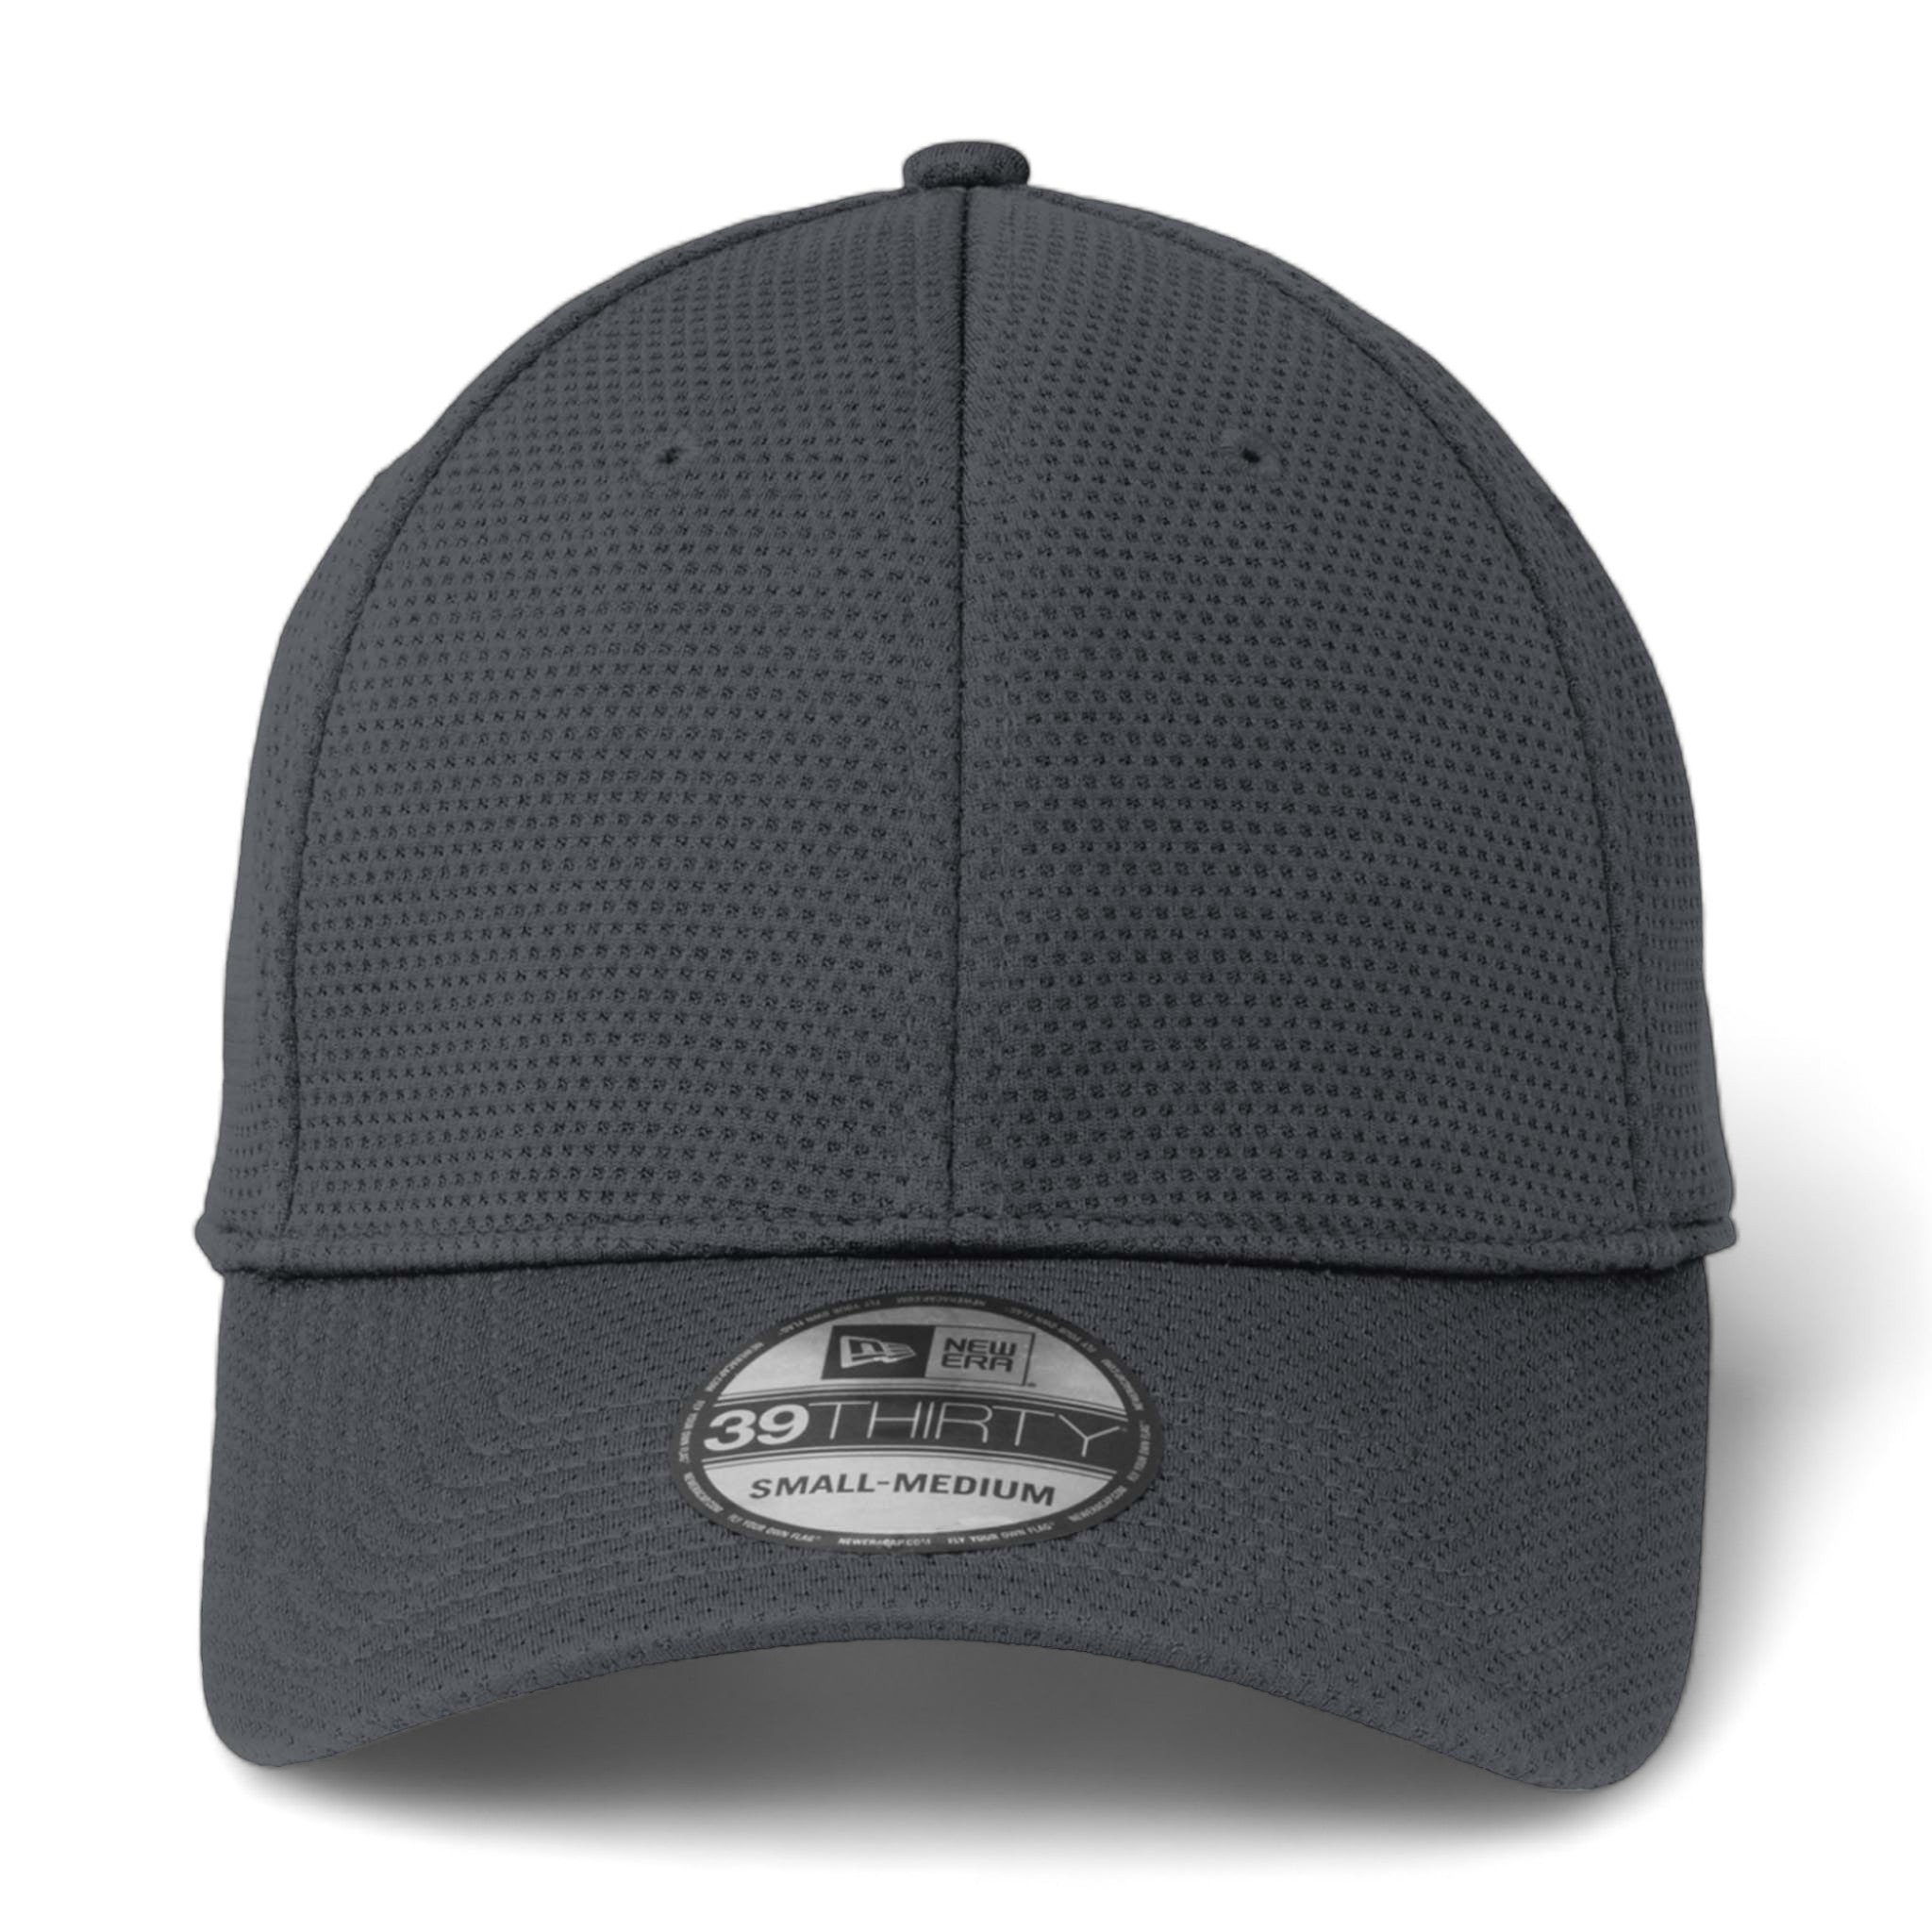 Front view of New Era NE1090 custom hat in charcoal